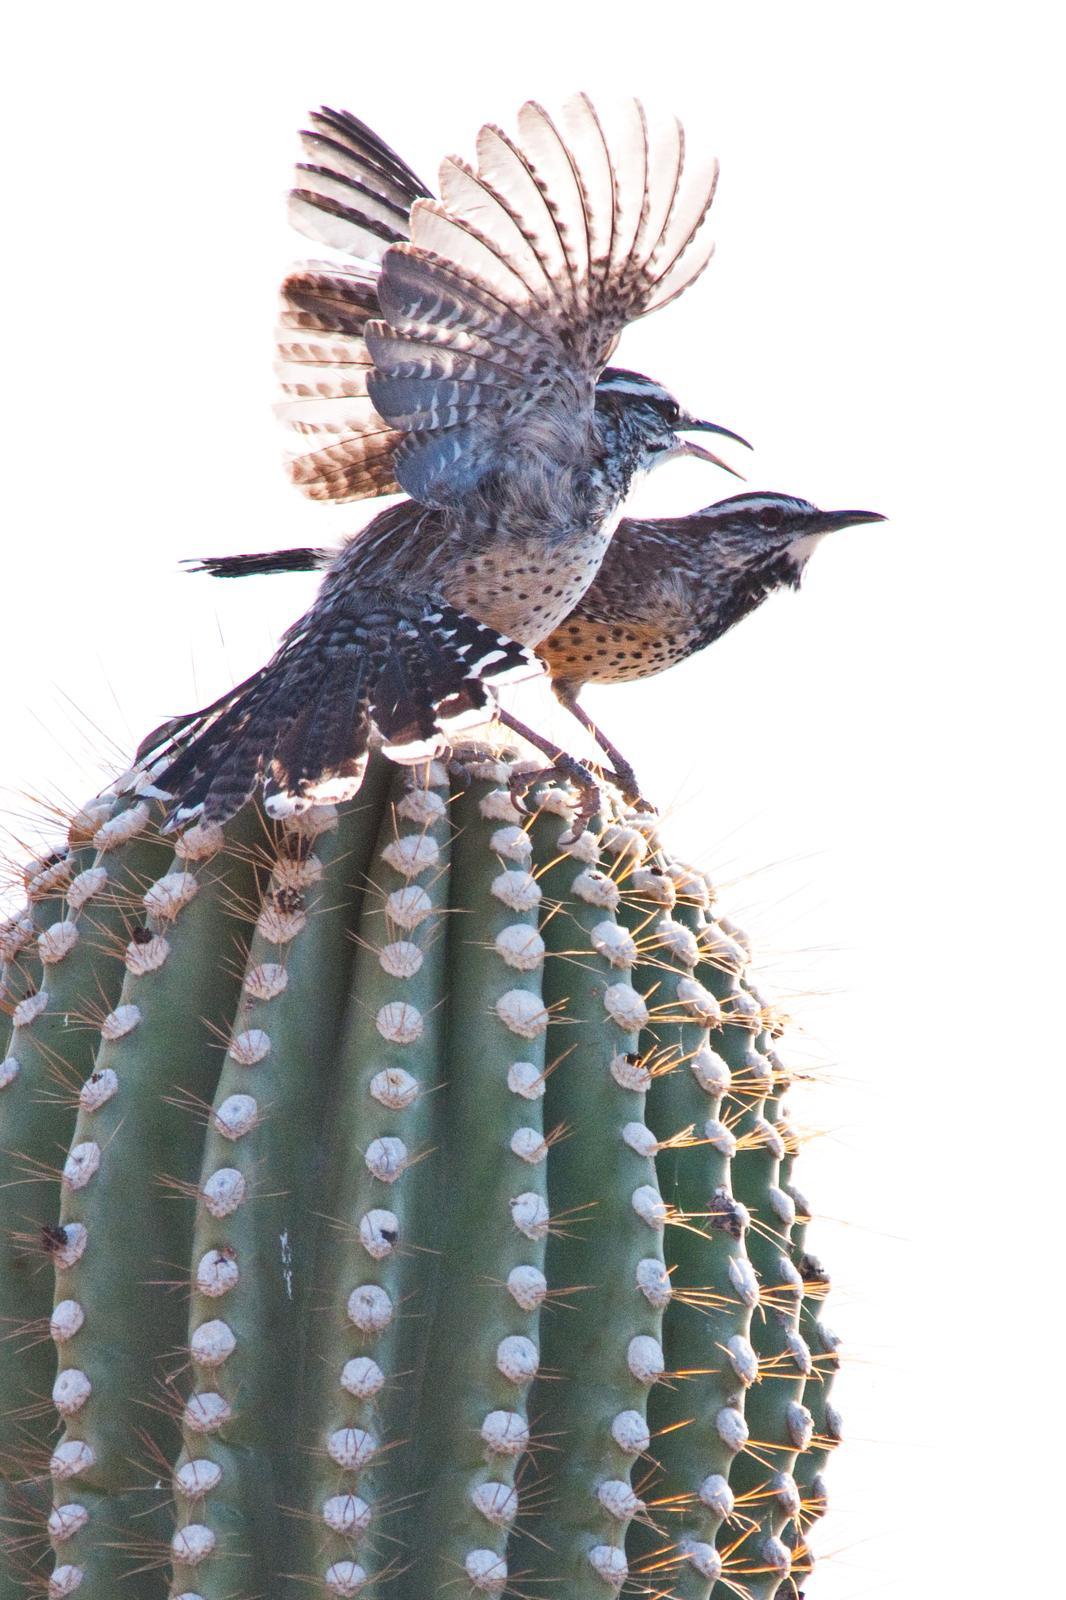 Cactus Wren Photo by Pete Myers